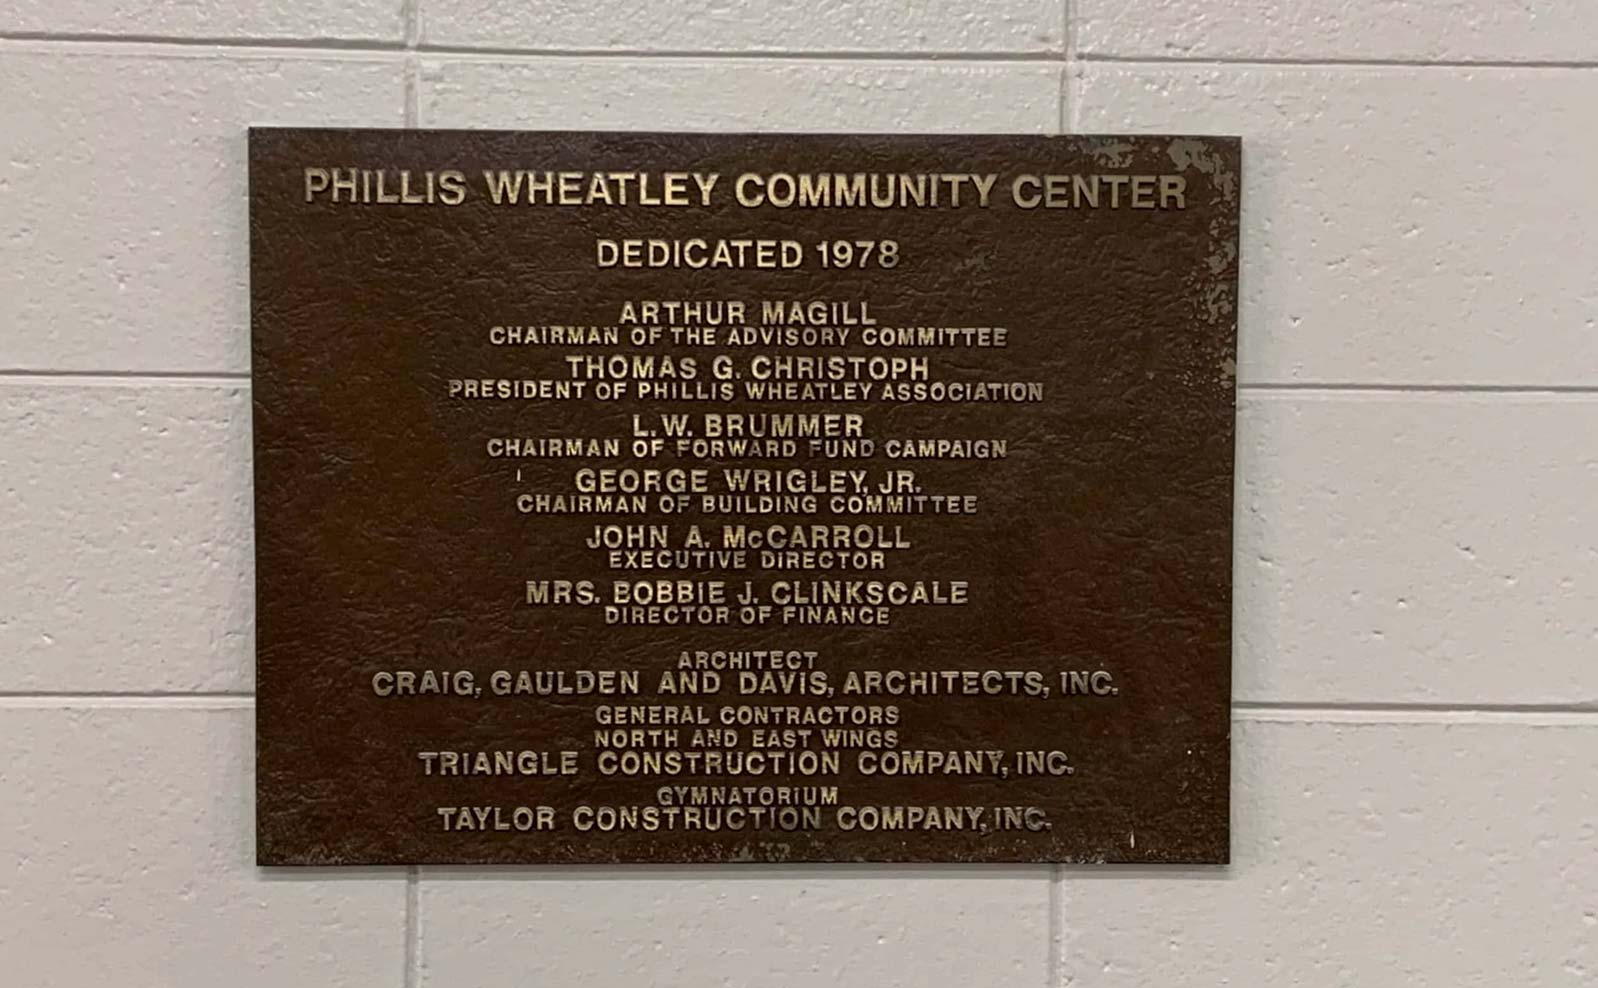 Phillis Wheatley Community Center Serving Greenville SC History 1978 The Center Moves to Greenacre Road